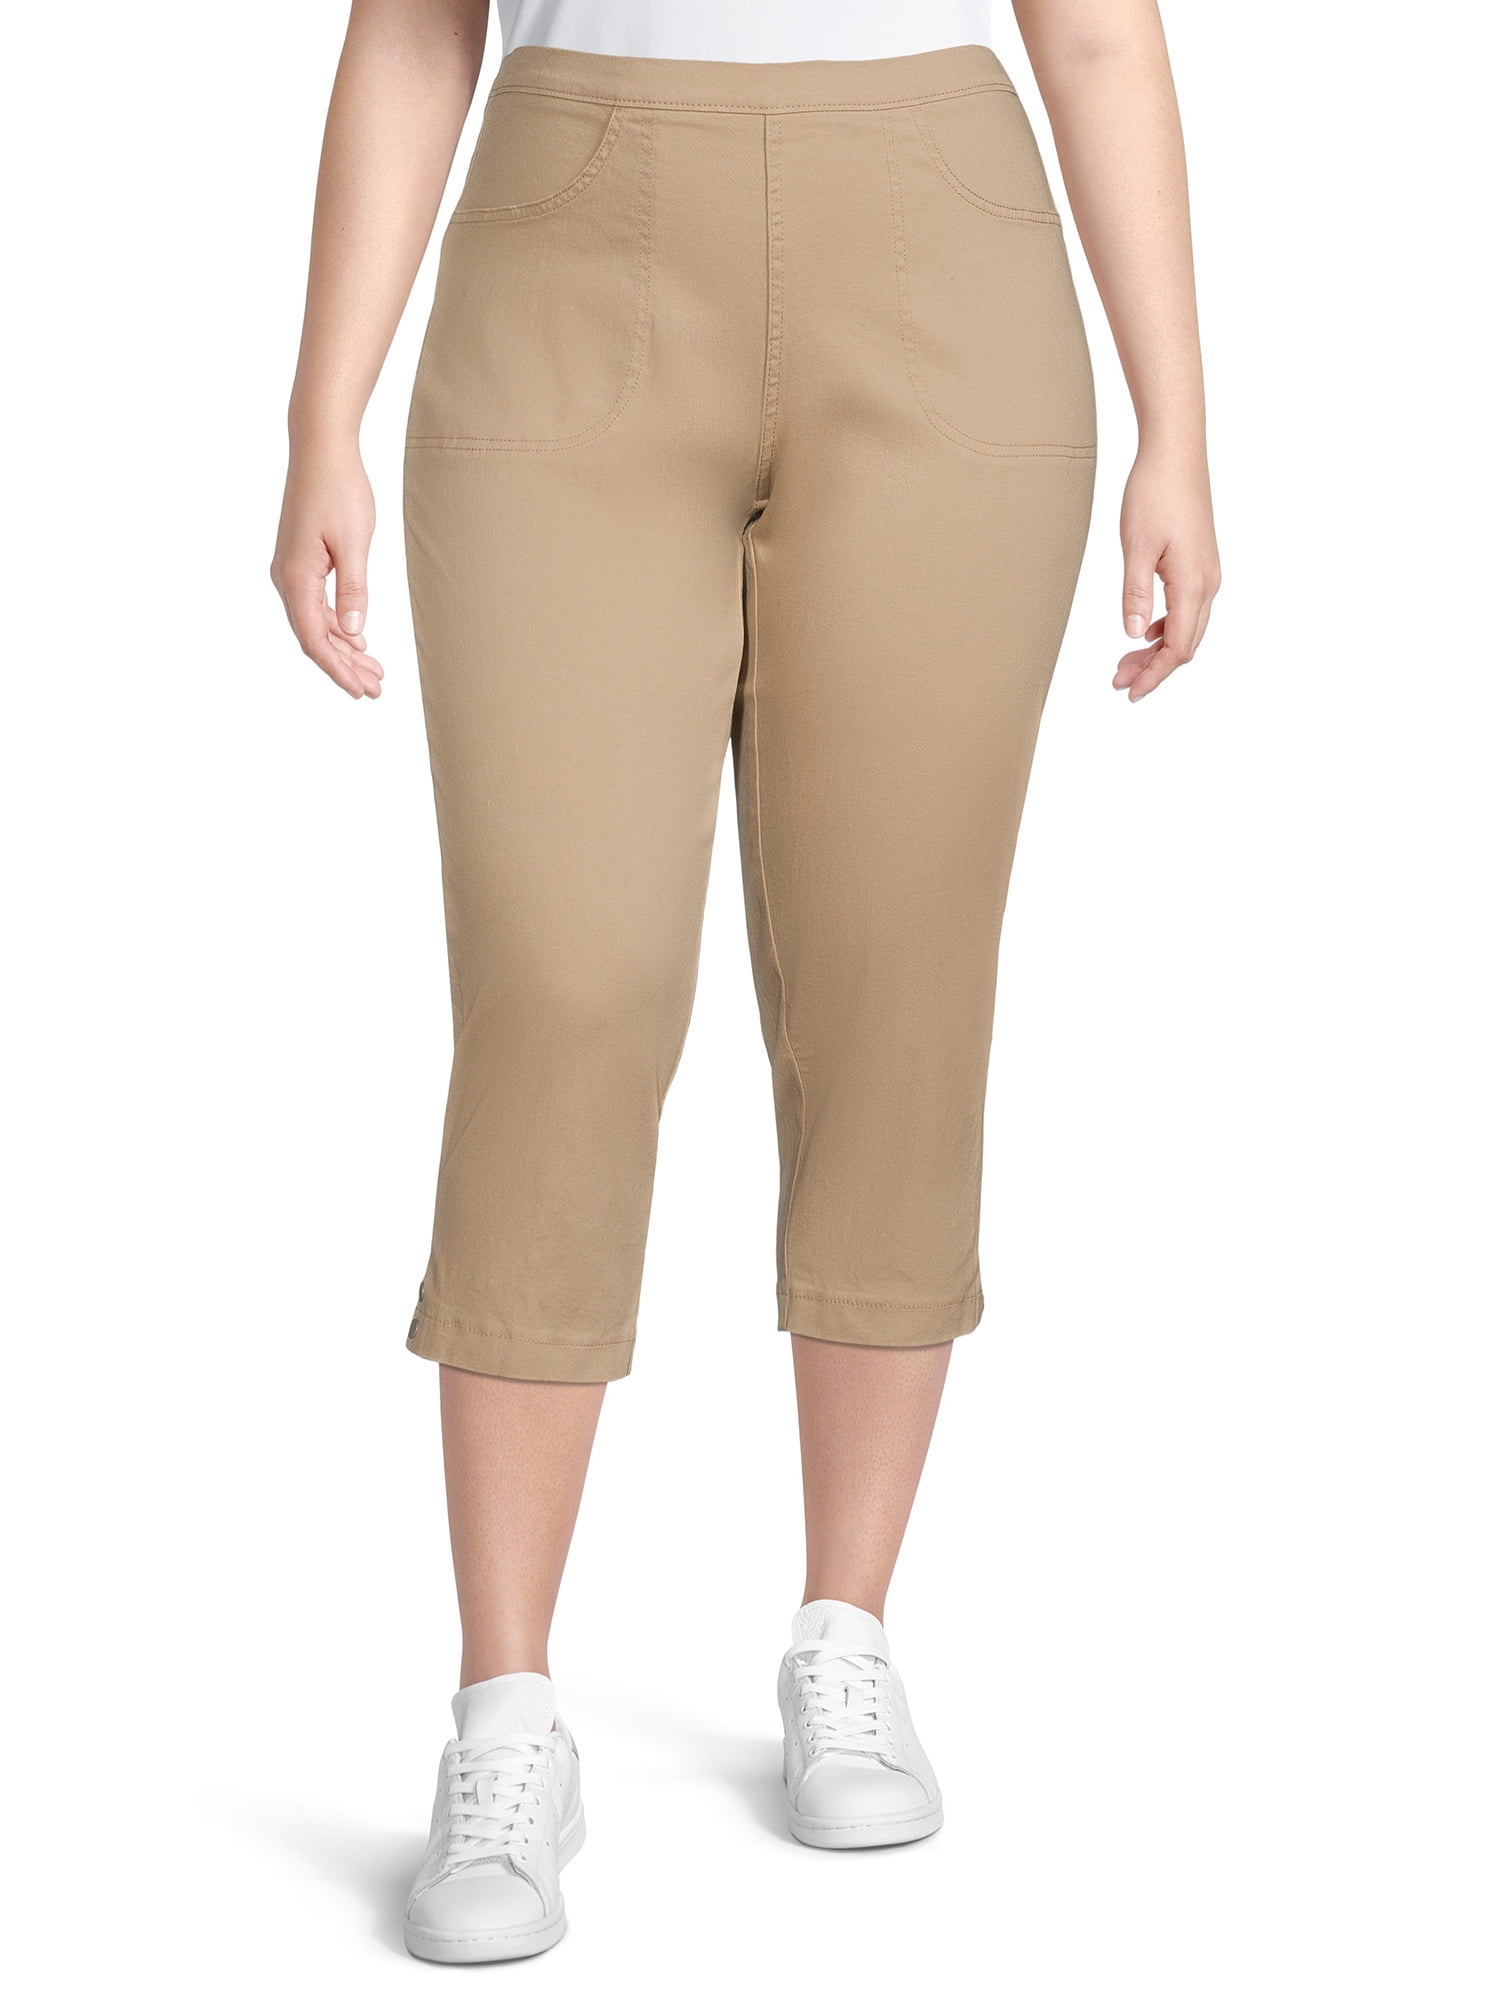 Just My Size Womens Plus Size Pull on 2Pocket Stretch Woven Pants Also  in Petite  Walmartcom